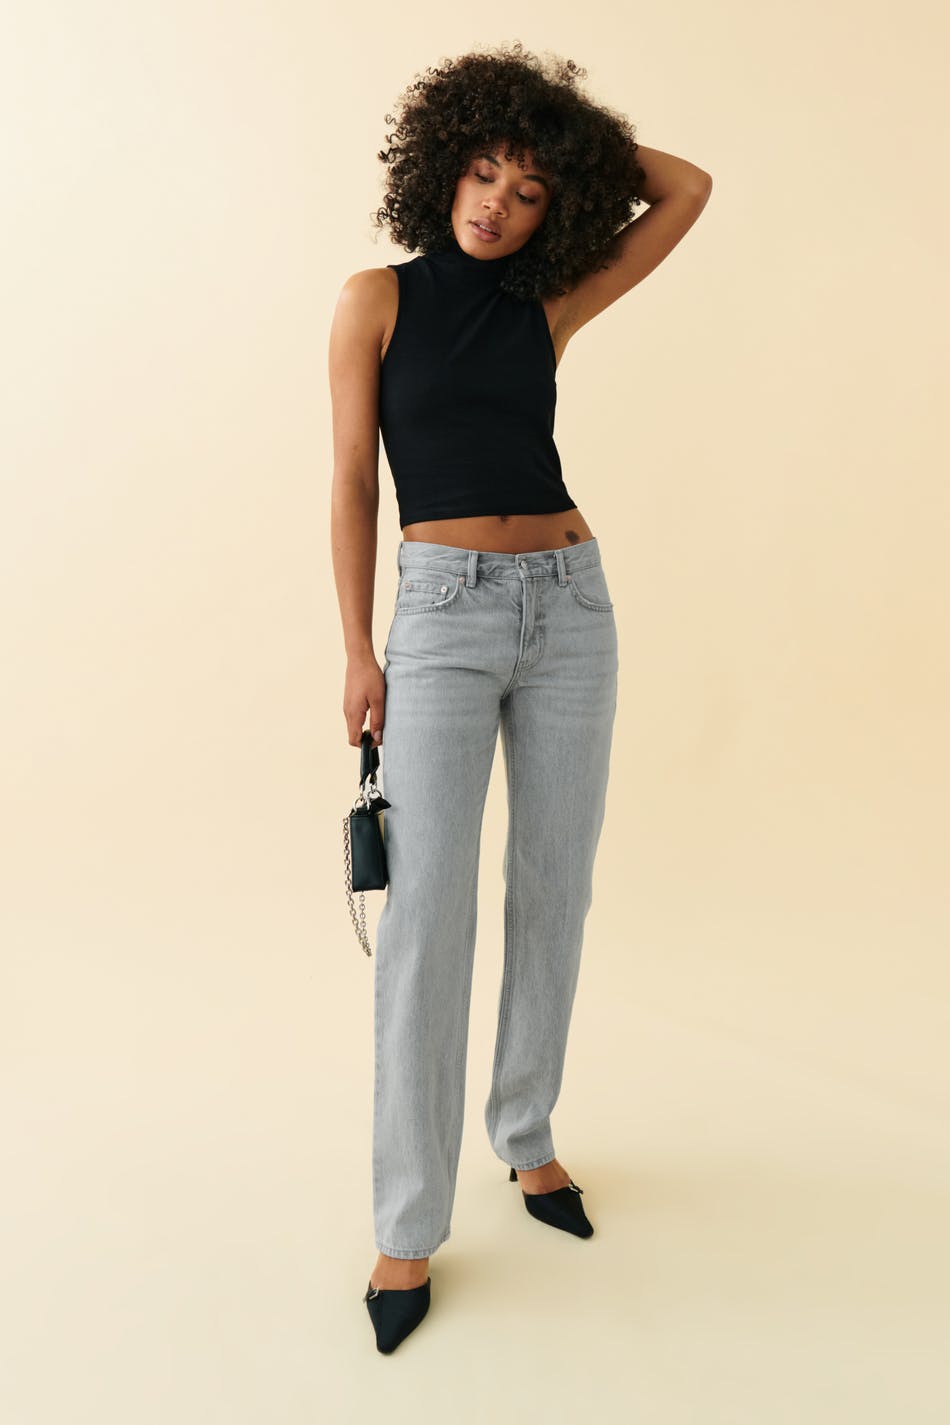 Low jeans - Gina Tricot